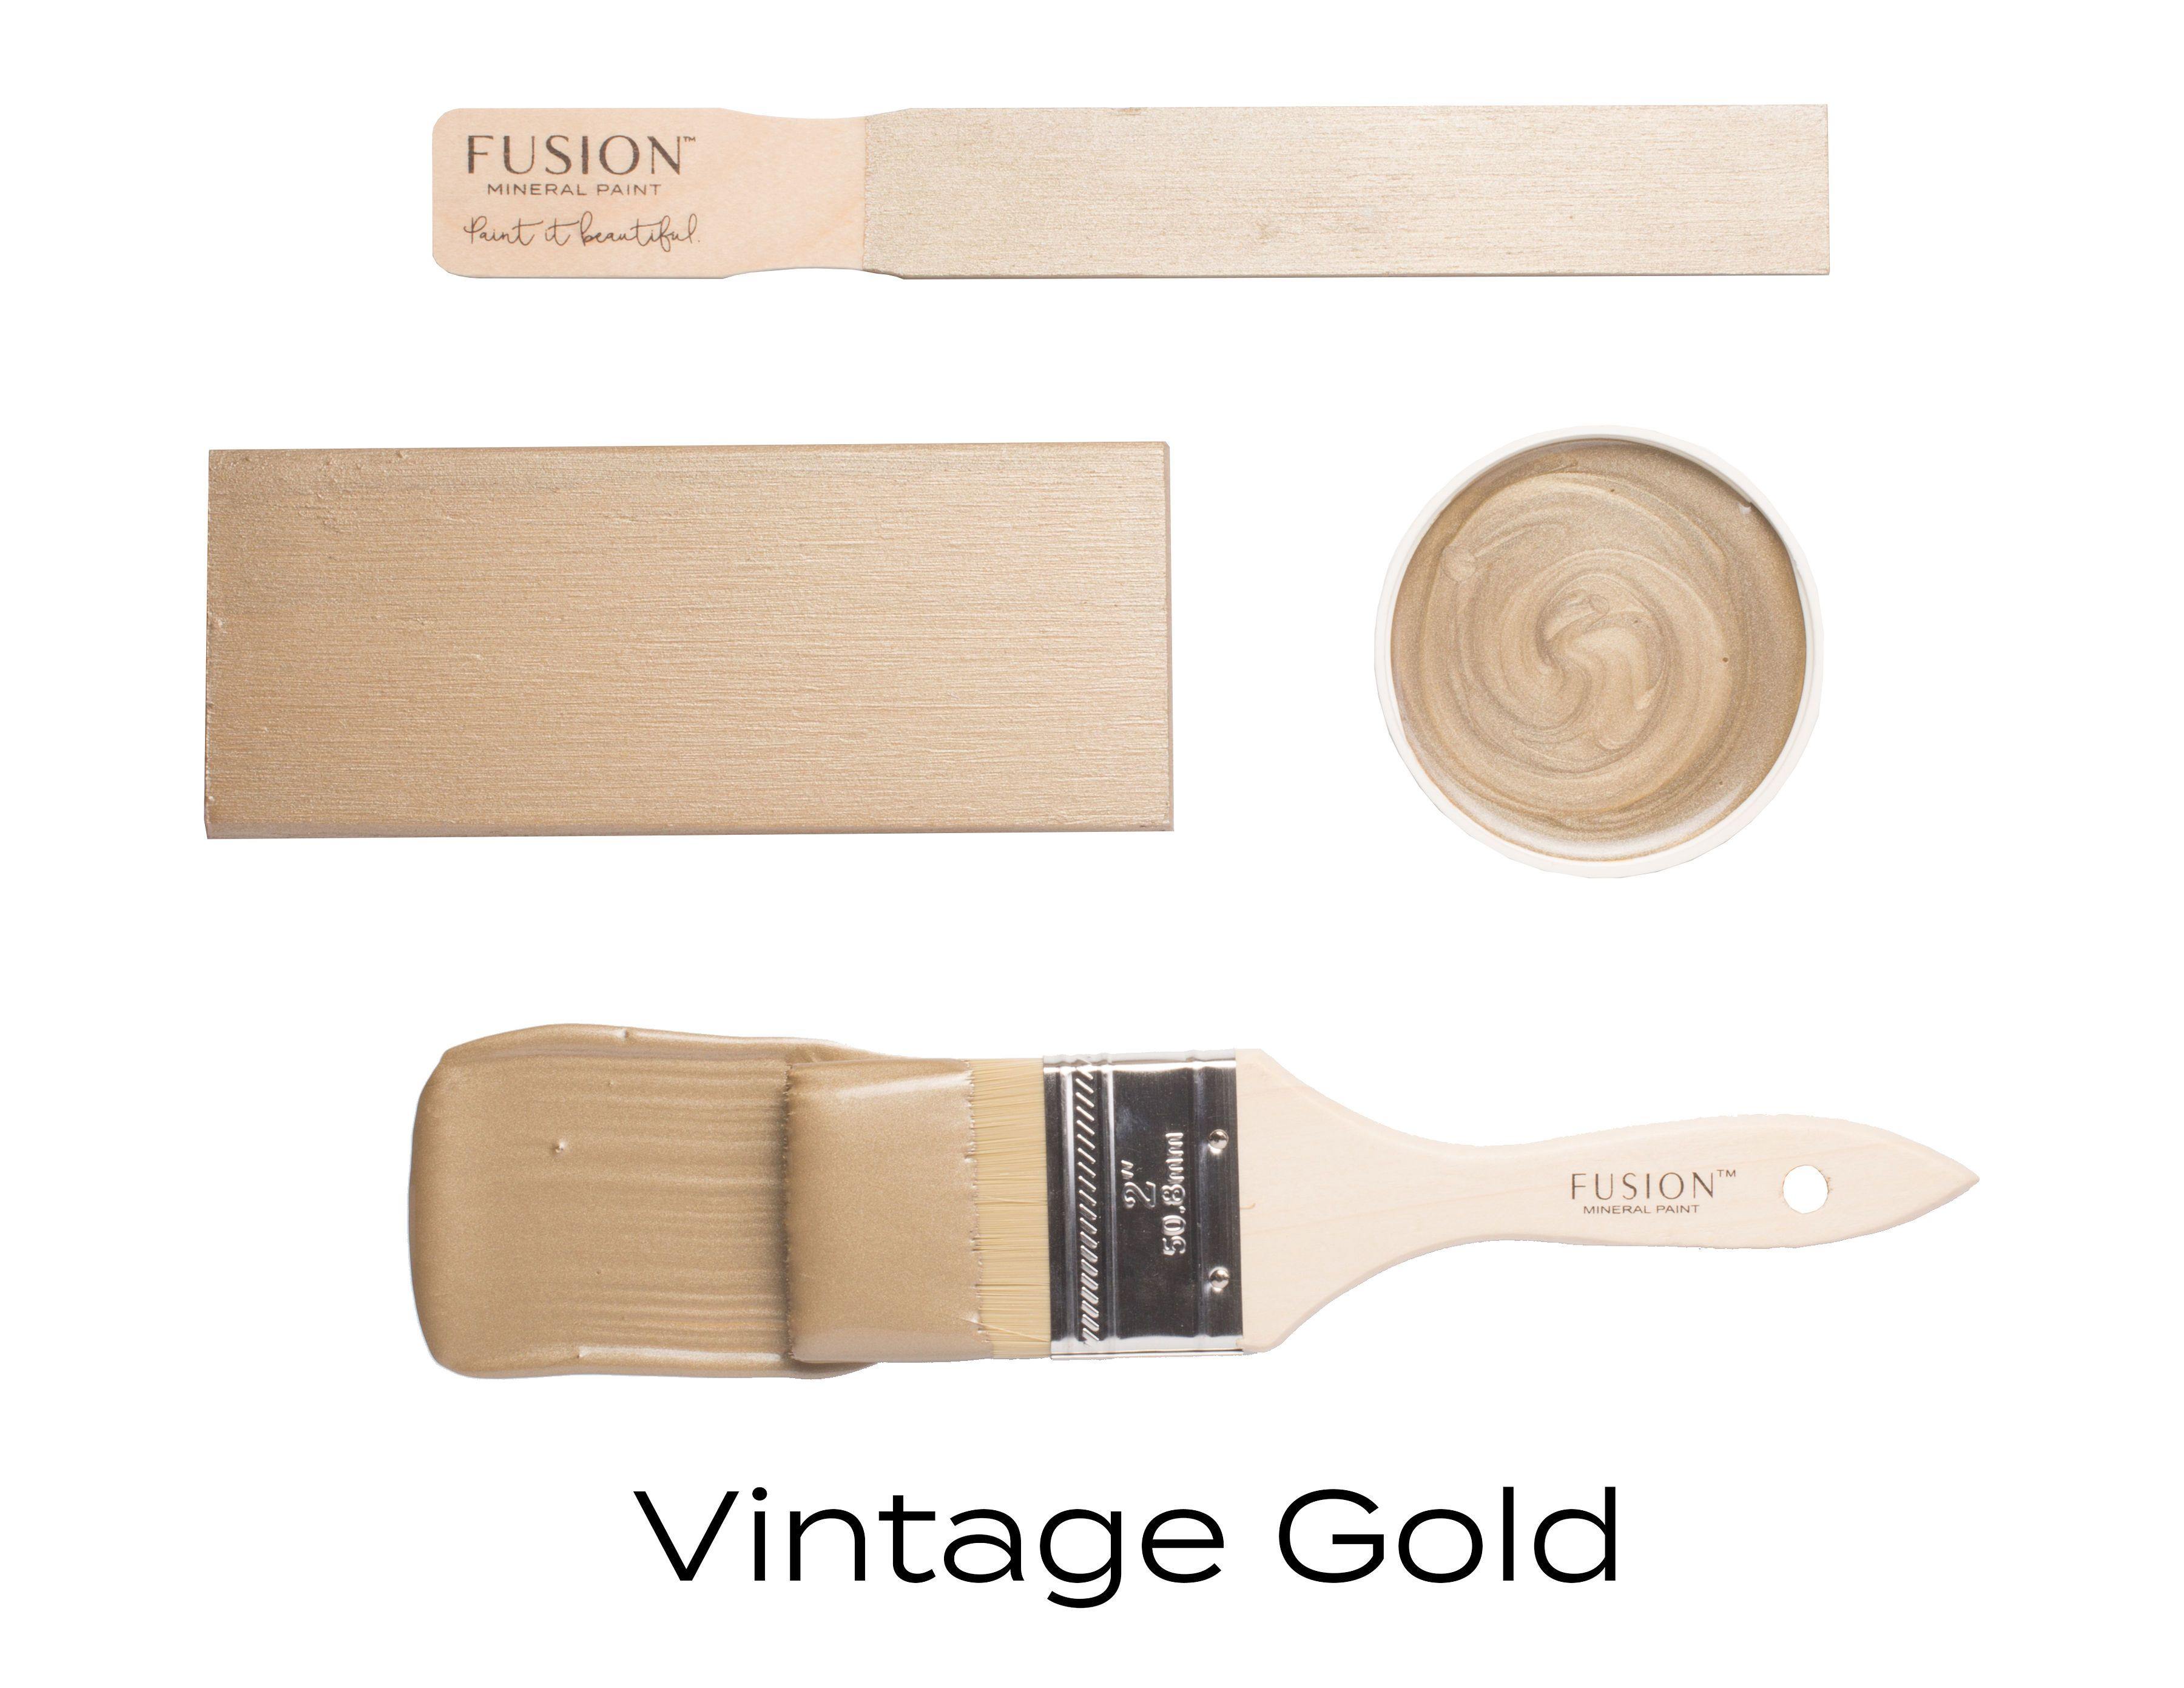 Fusion Mineral Paint Vintage Gold Brushstroke